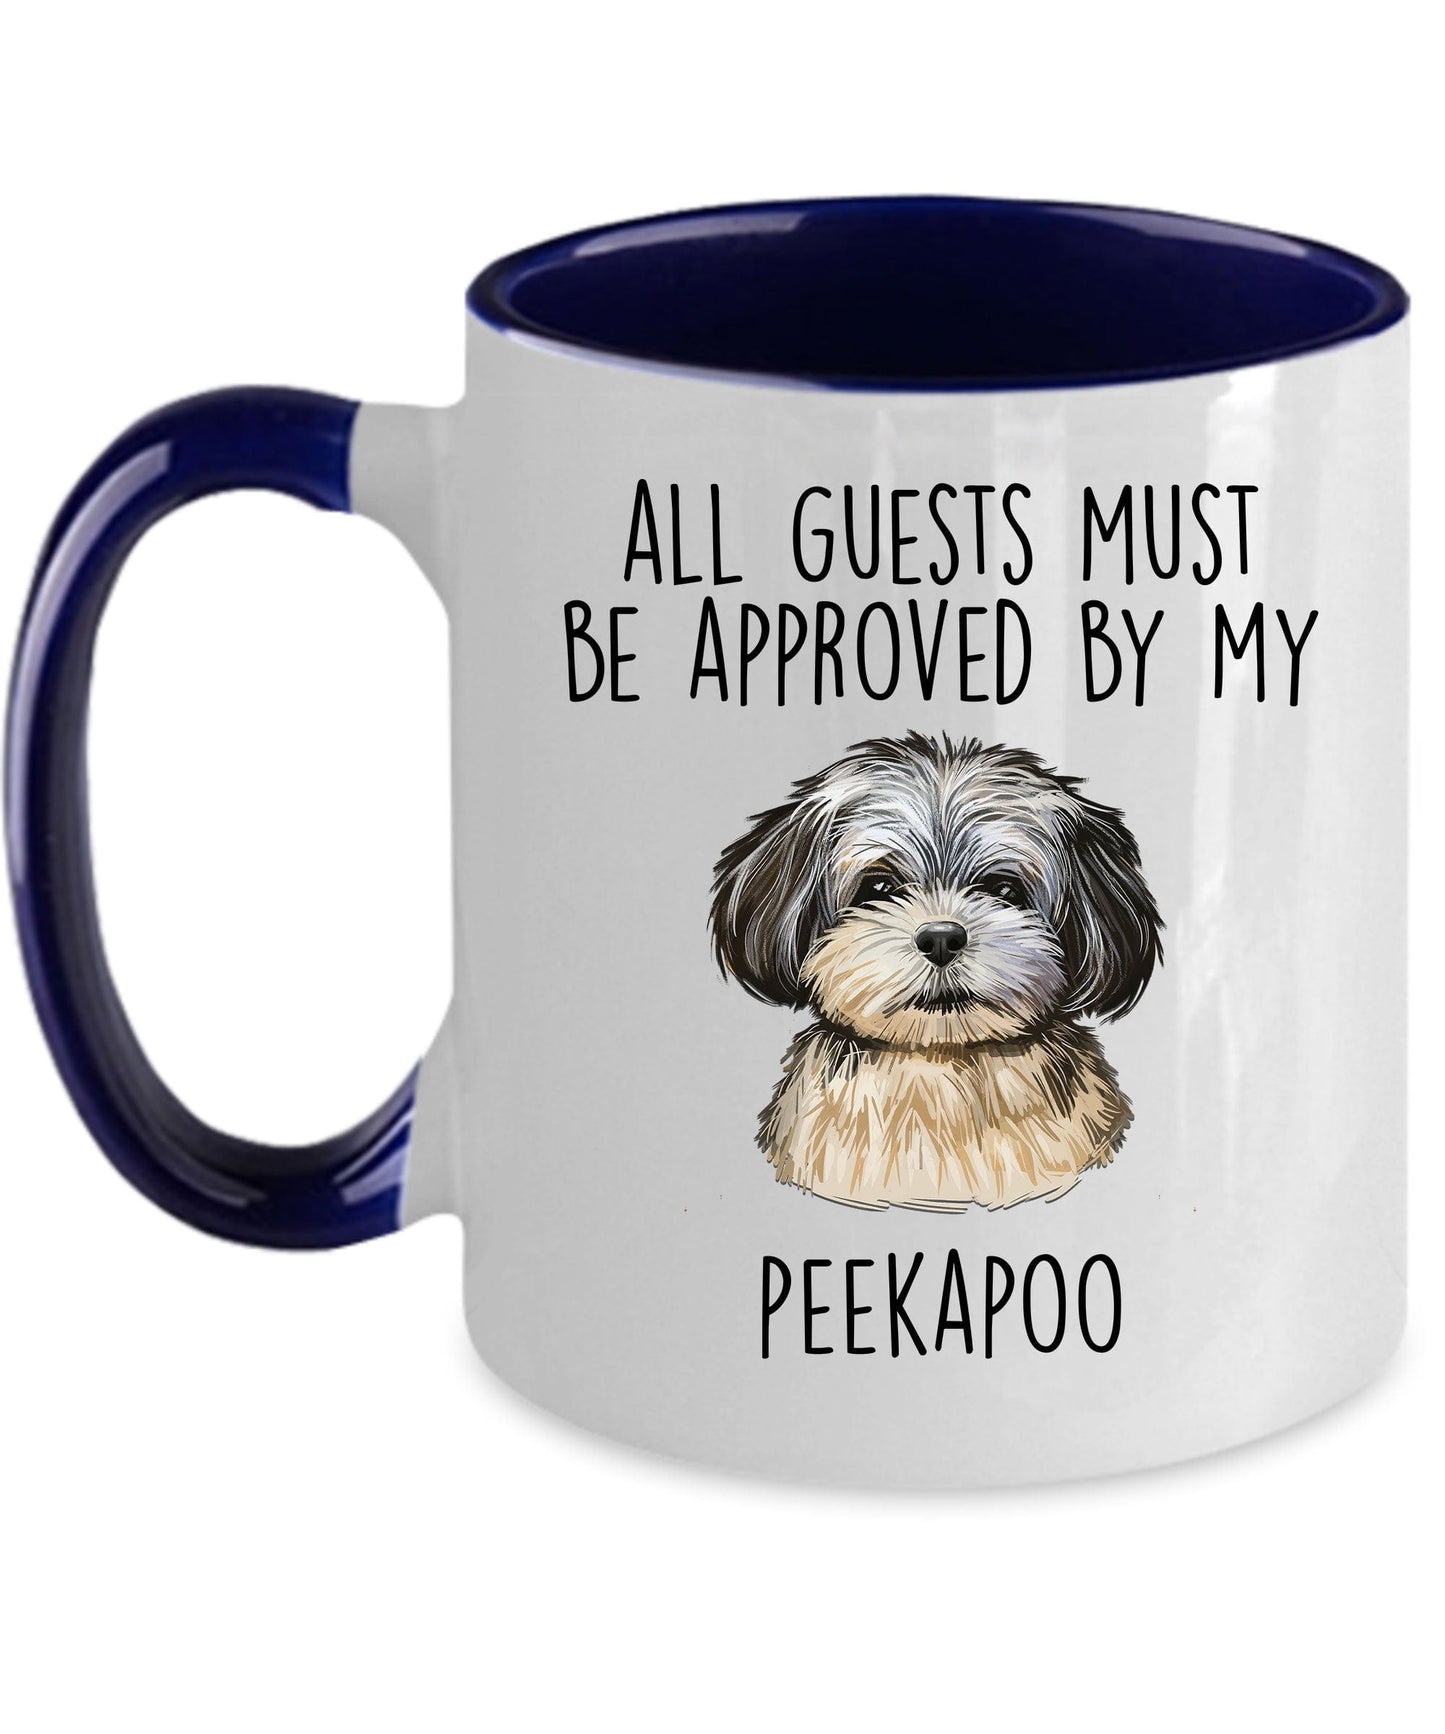 Peekapoo Puppy Funny Coffee Mug - All guests must be approved by my Peekapoo